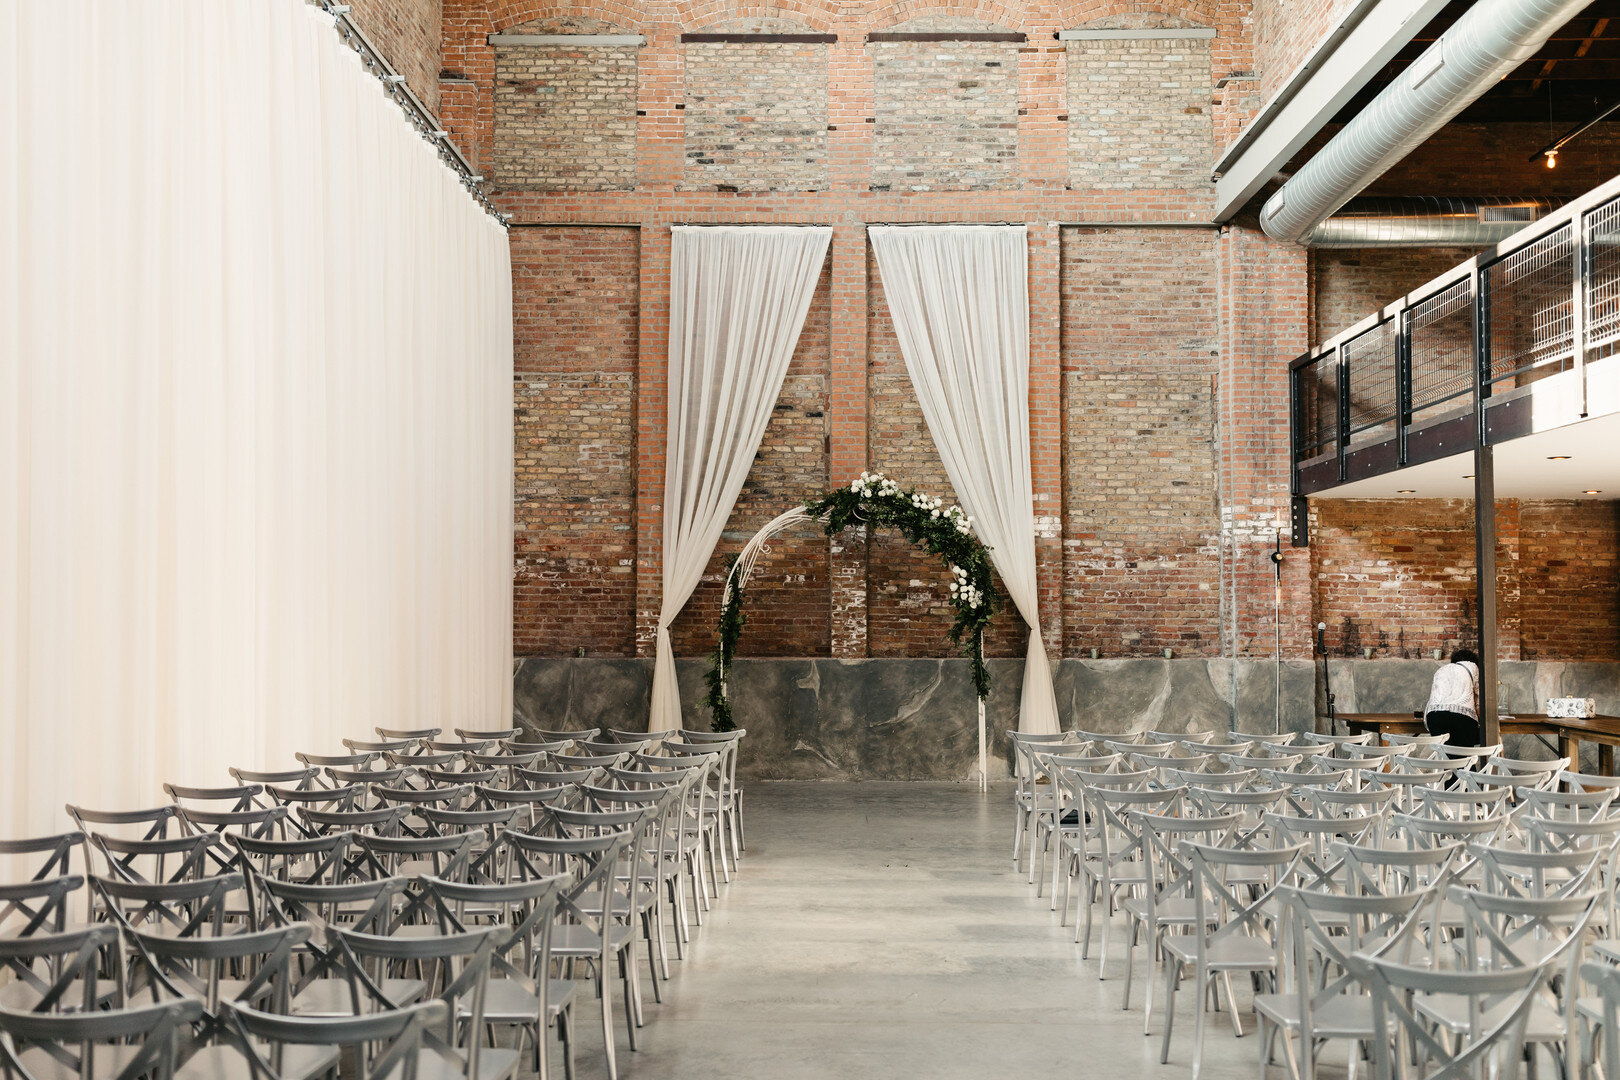 Wedding Ceremony Setup: Fairlie Industrial Chicago Wedding captured by We Are The Bowsers. See more wedding inspiration at CHItheeWED.com!